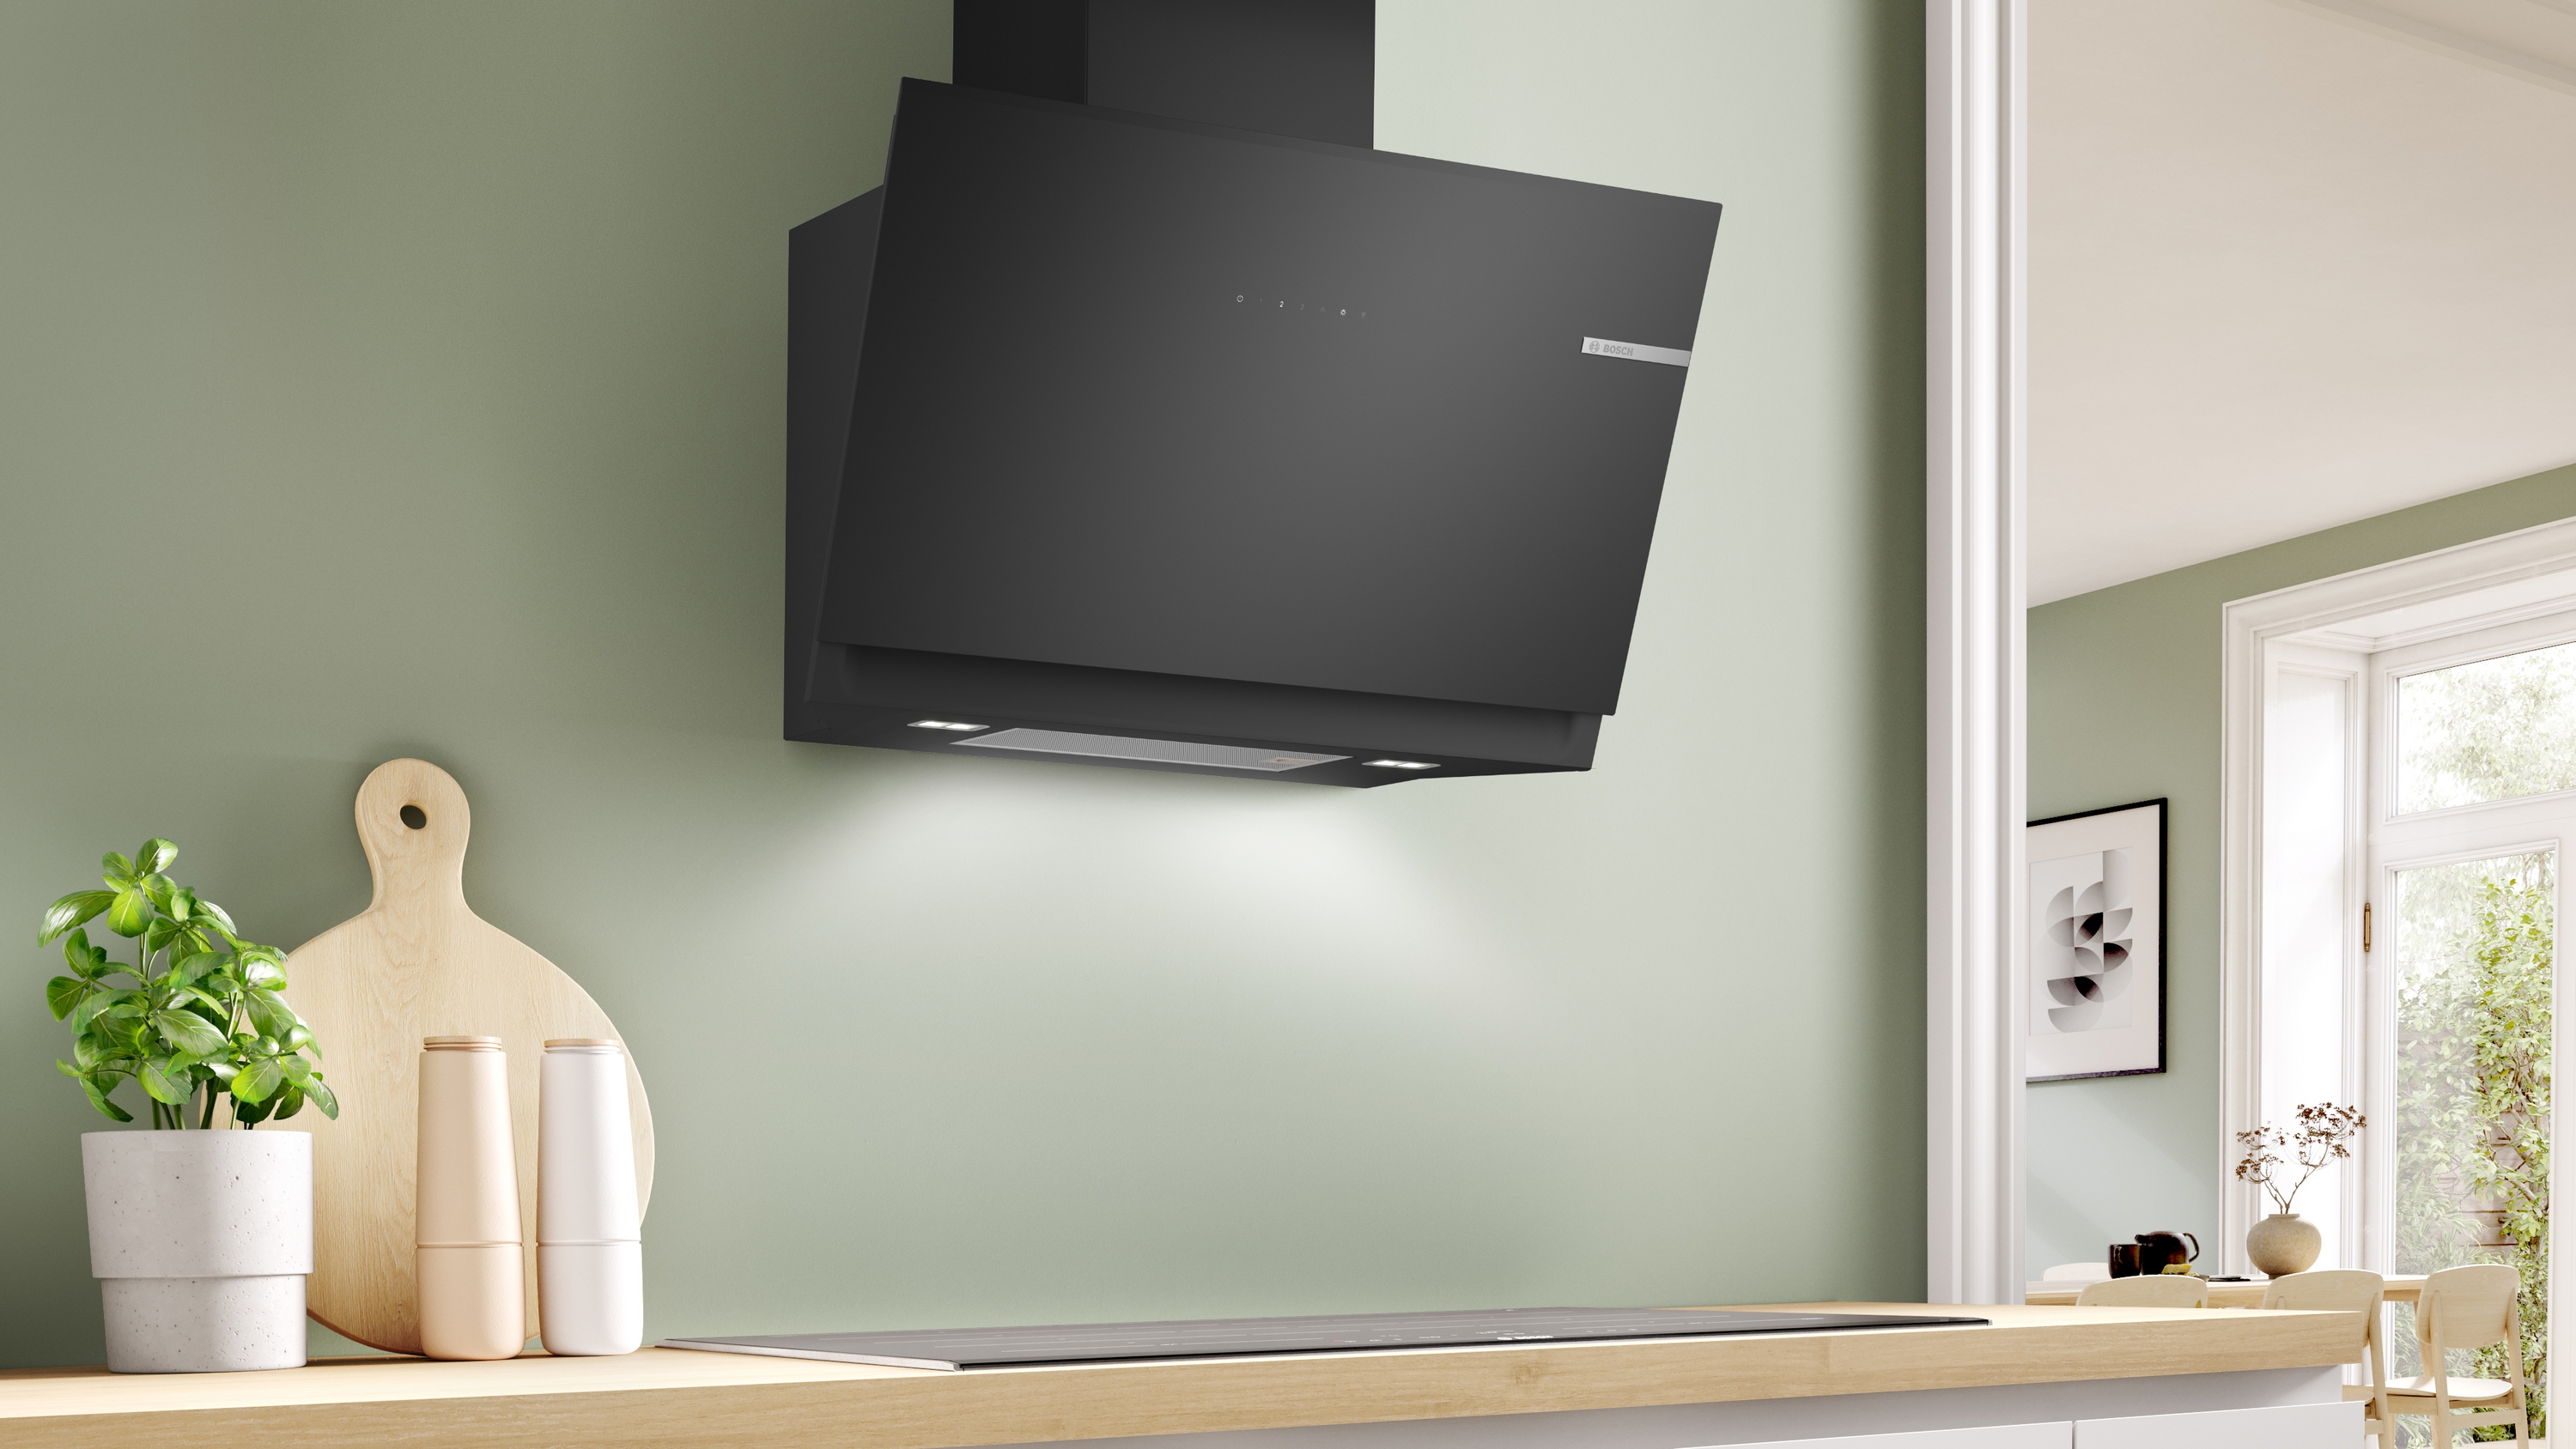 Series 6, wall-mounted cooker hood, 80 cm, clear glass black printed, DWK81AN60